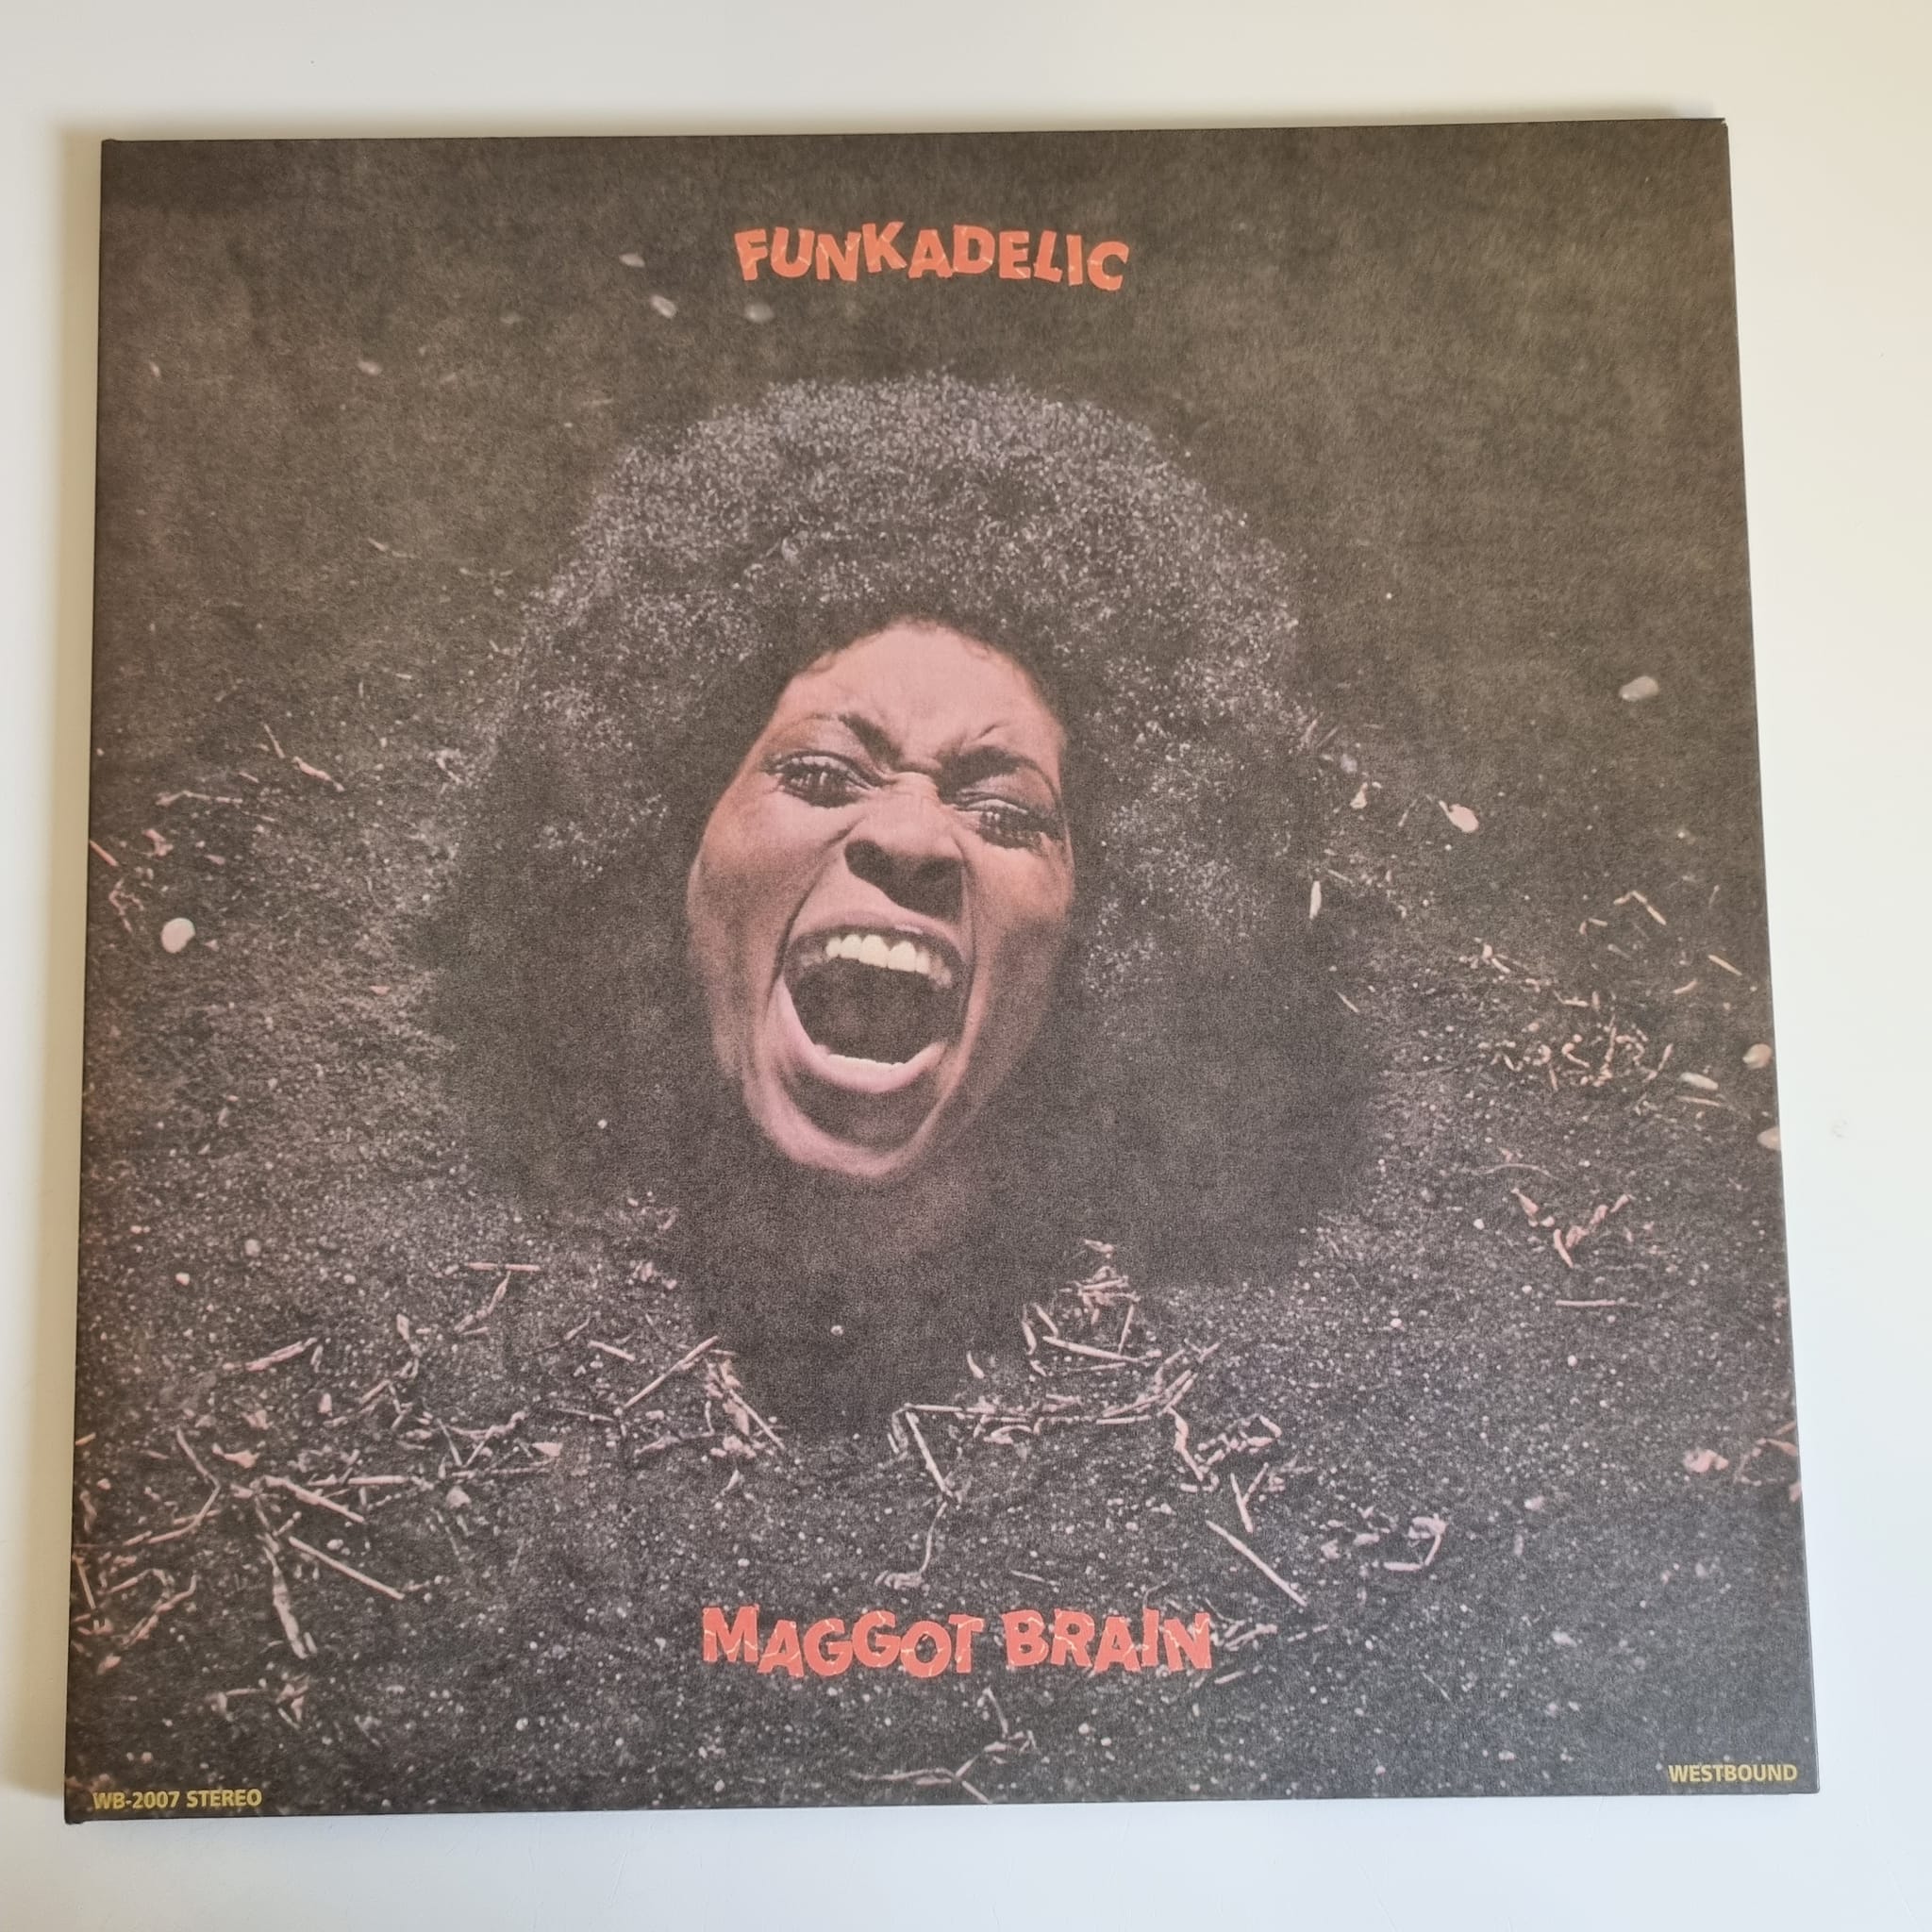 Buy this rare Funkadelic record by clicking here